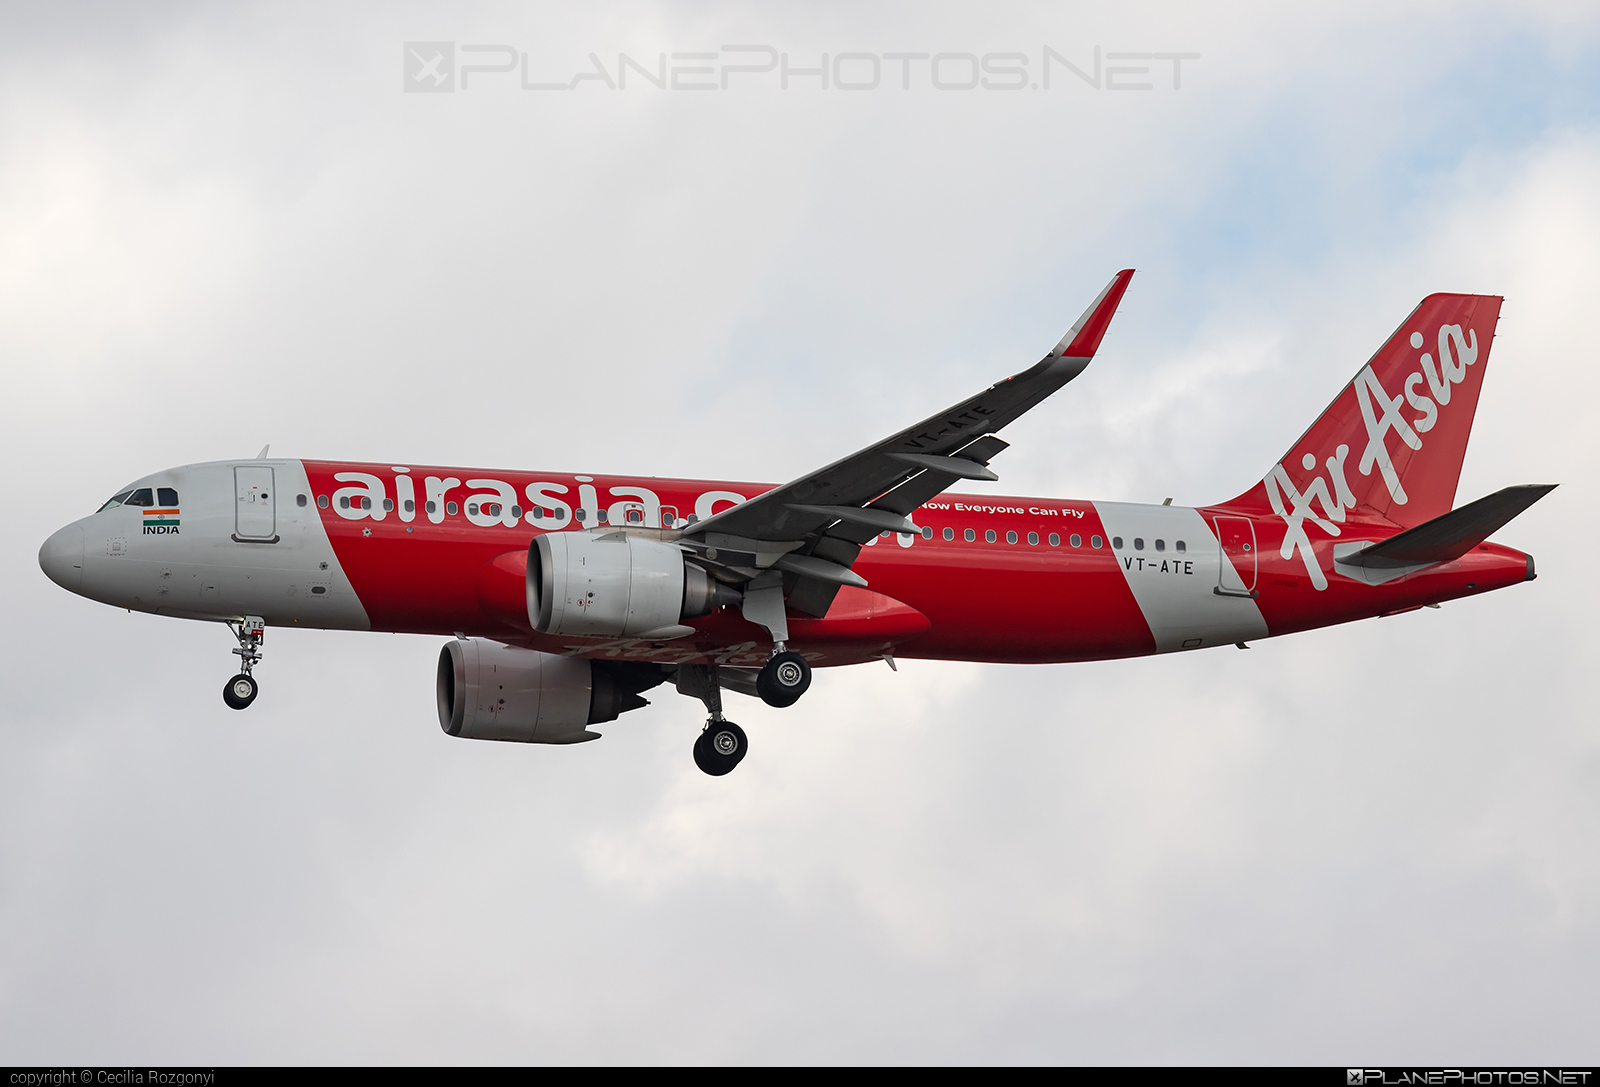 Airbus A320-251N - VT-ATE operated by AirAsia #a320 #a320family #a320neo #airbus #airbus320